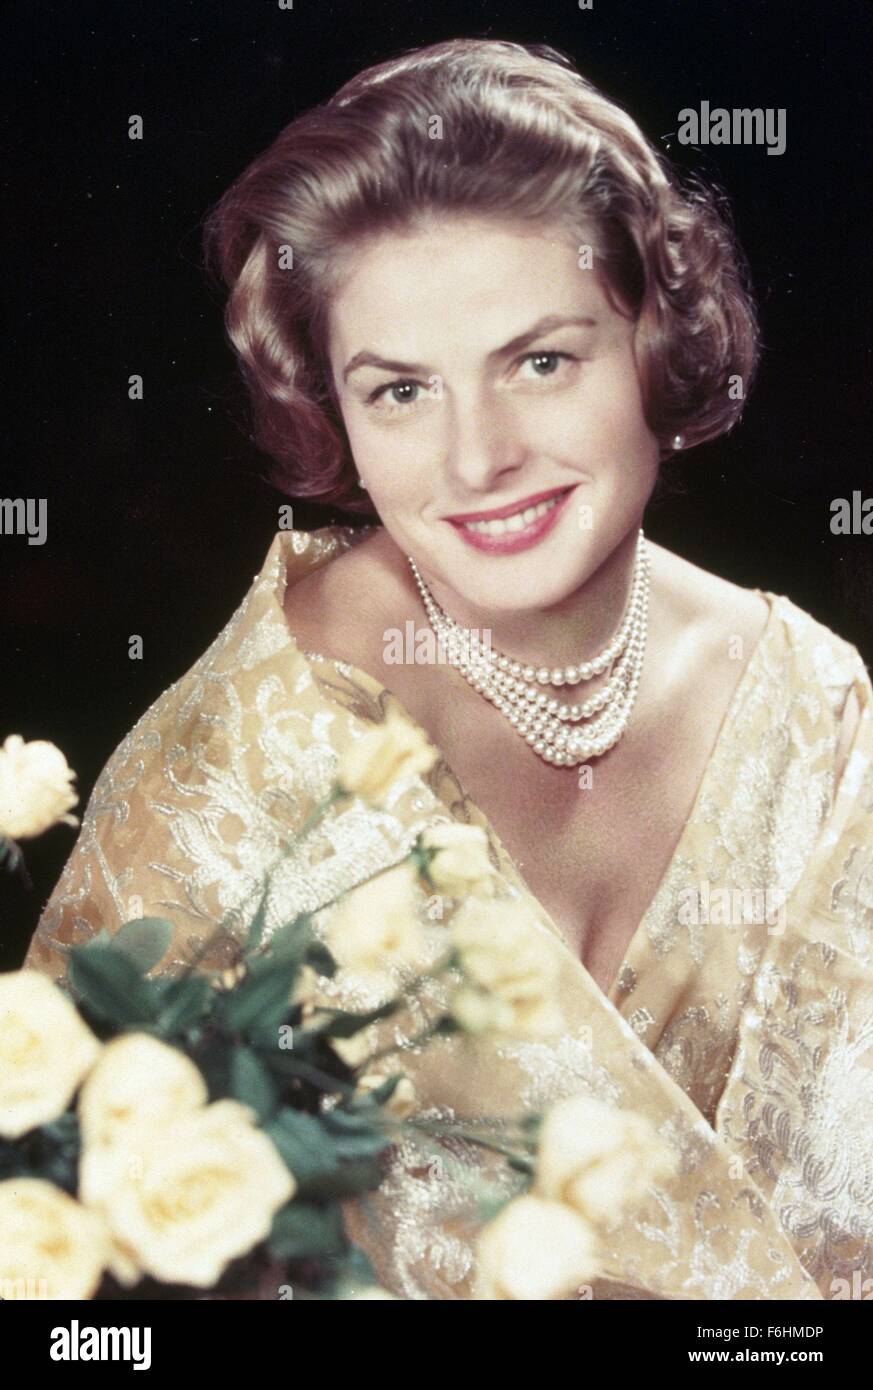 1958, Film Title: INDISCREET, Director: STANLEY DONEN, Pictured:  ACCESSORIES, INGRID BERGMAN, BLOOMS (FLOWERS), CLOTHING, STANLEY DONEN,  EVENING GOWN. (Credit Image: SNAP Stock Photo - Alamy